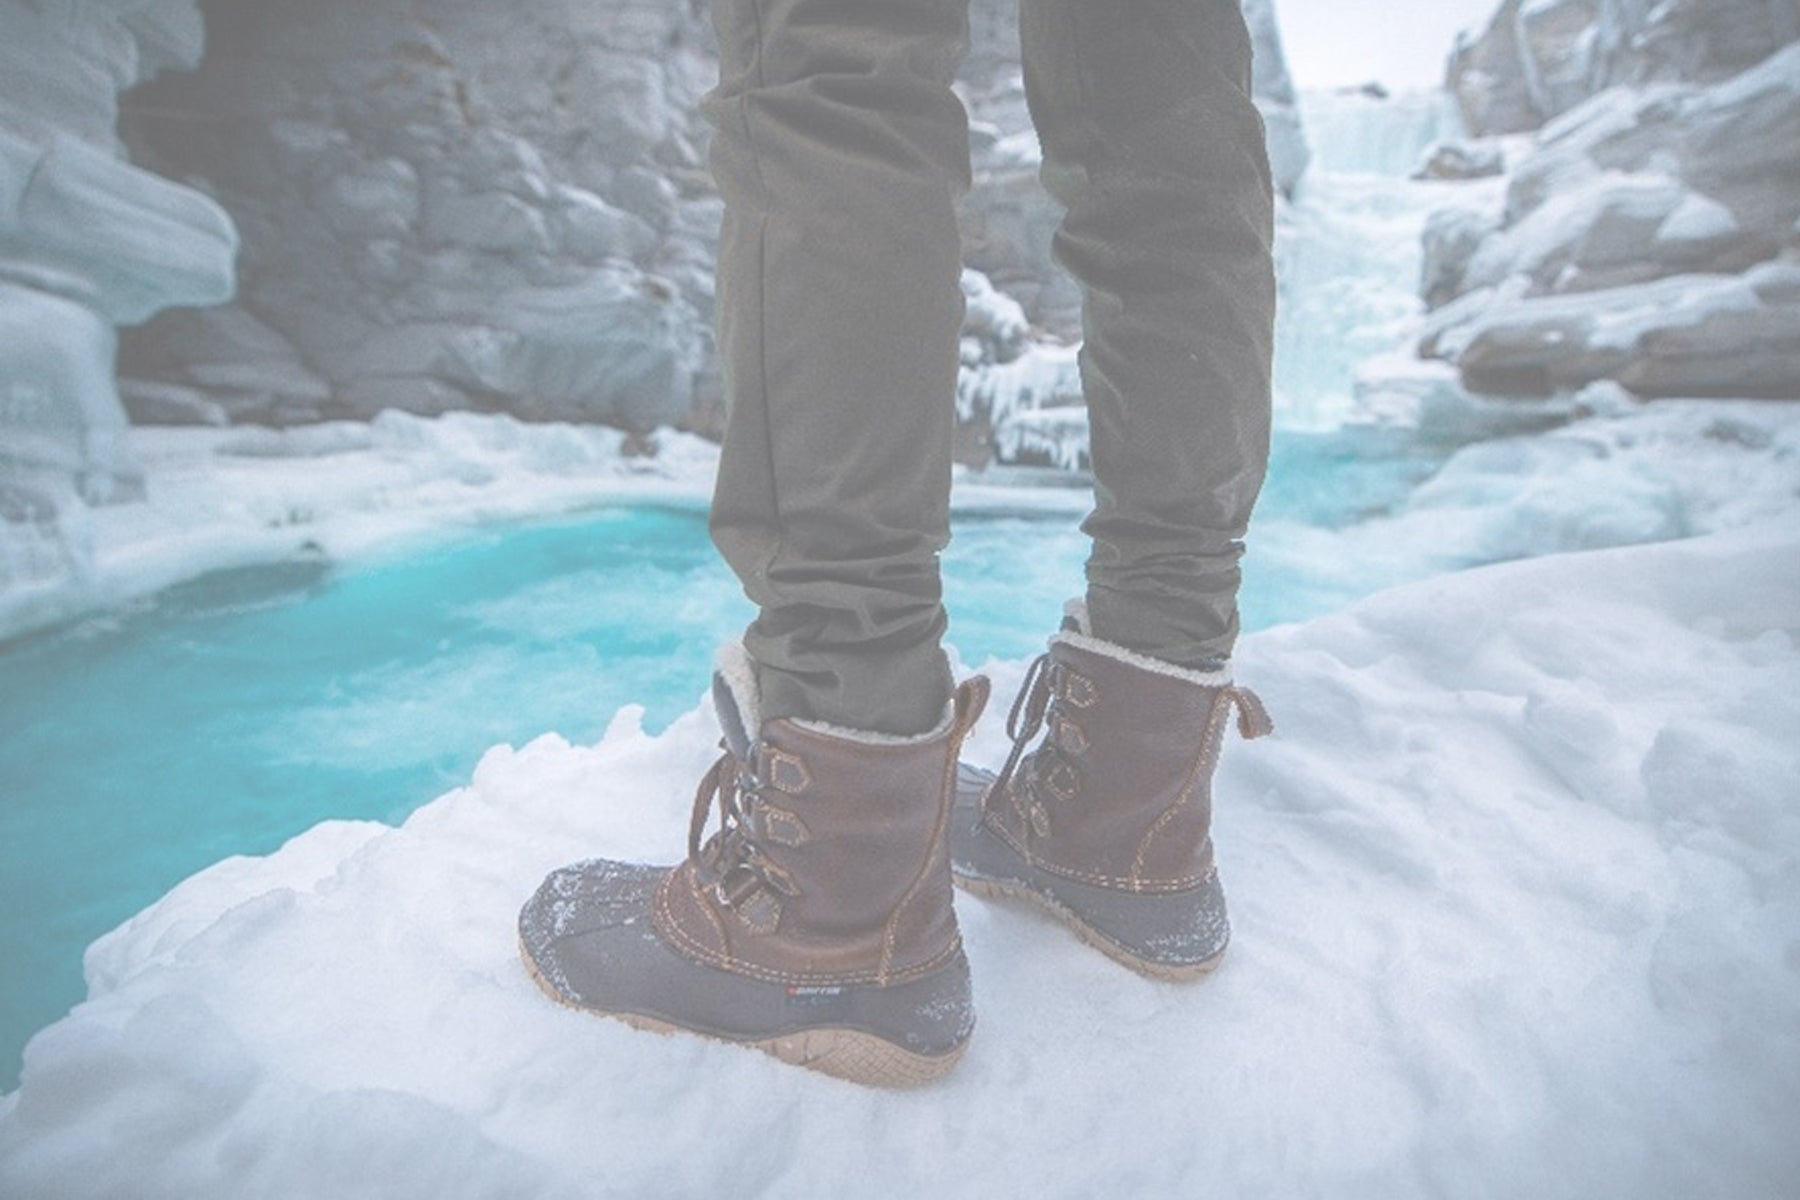 Build-a-Boot: How Baffin Makes Your Footwear